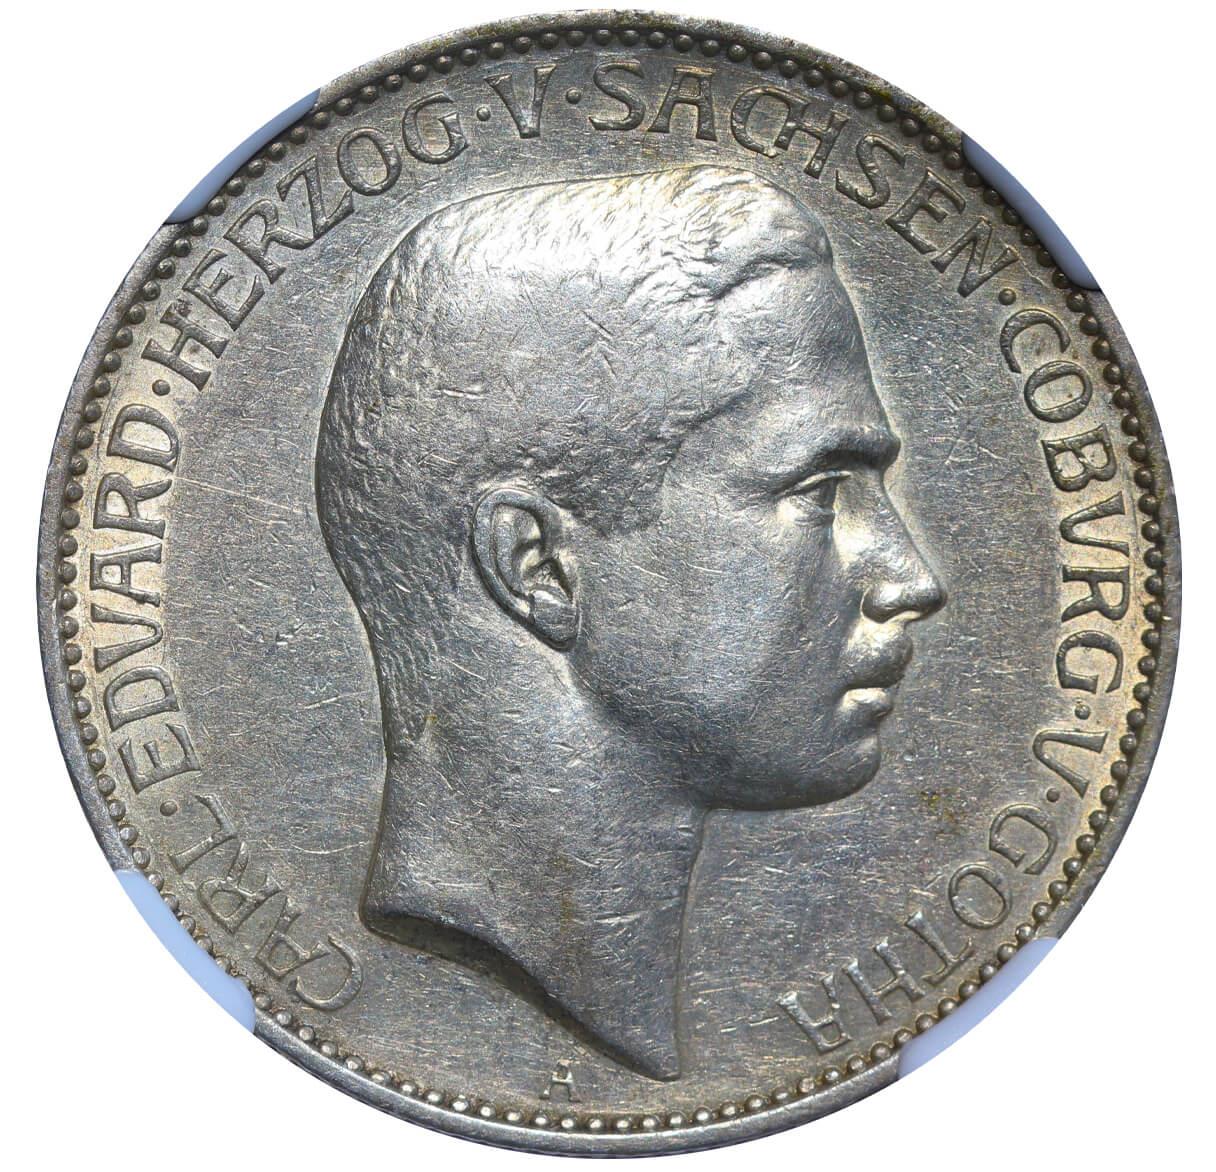 Duchy of Saxe-Coburg and Gotha, 2 Marks, 1905 year, A, NGC, AU DETAILS Cleaned - Image 2 of 3